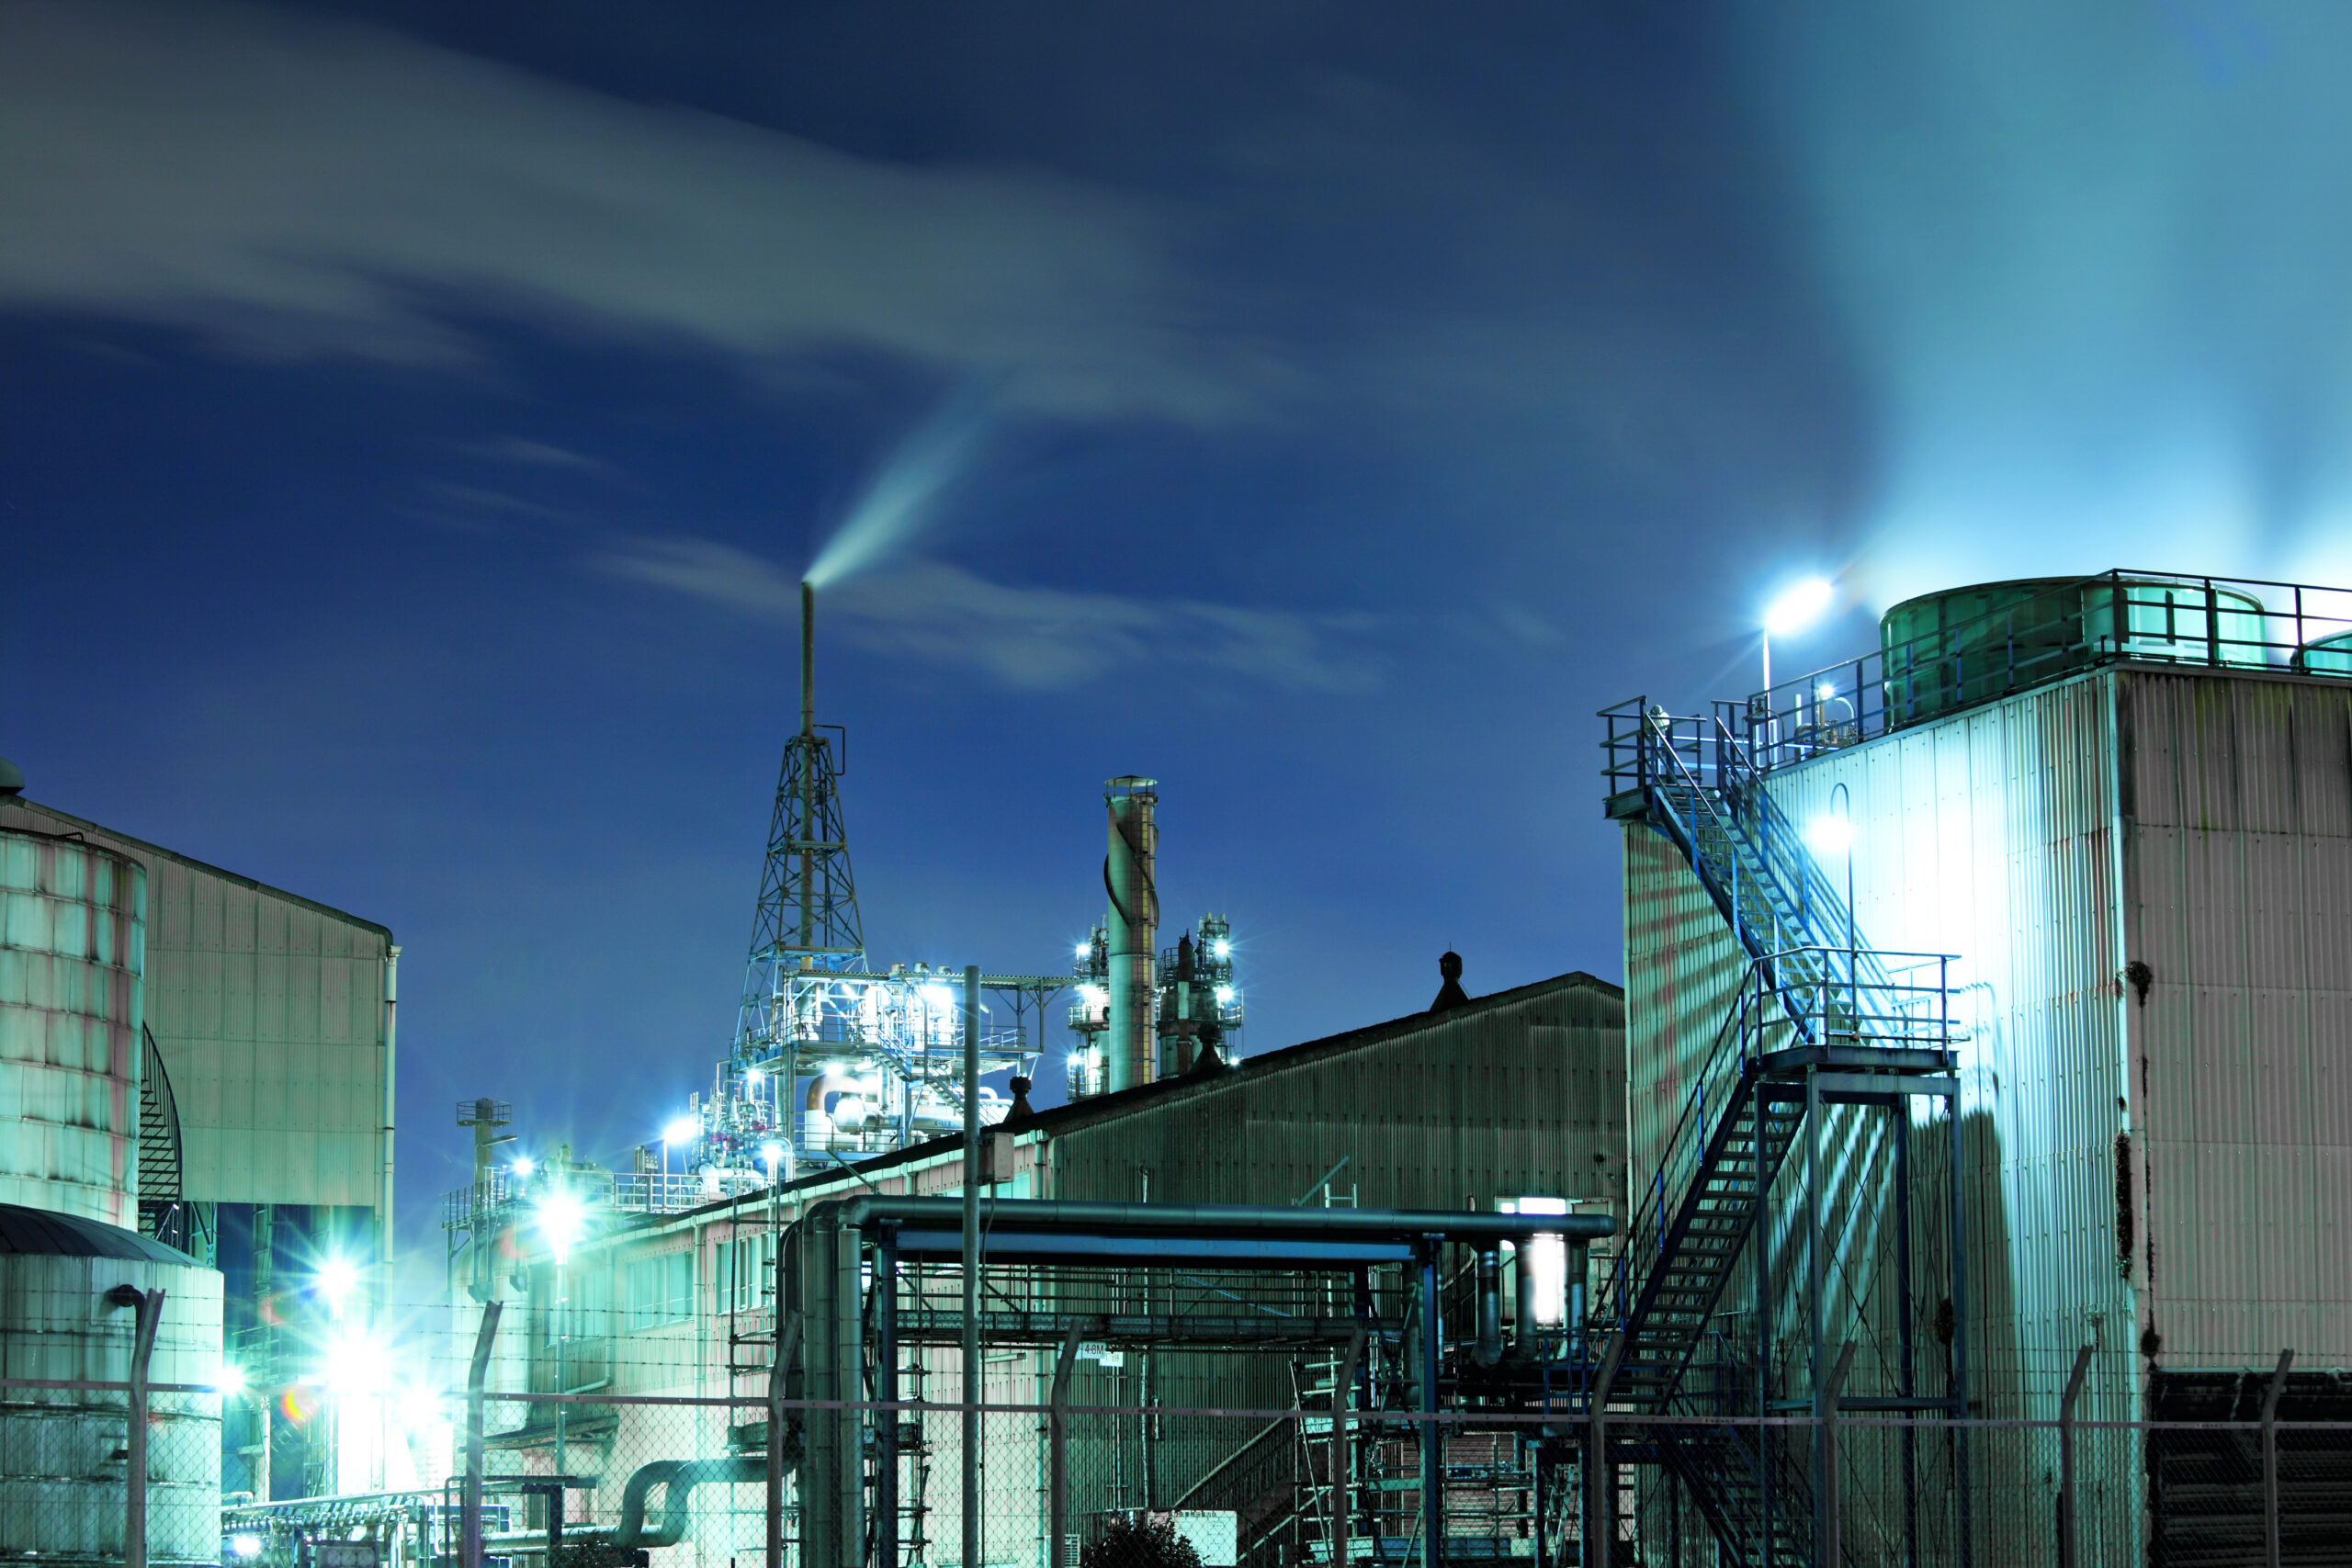 An industrial plant using IoT in its operations.